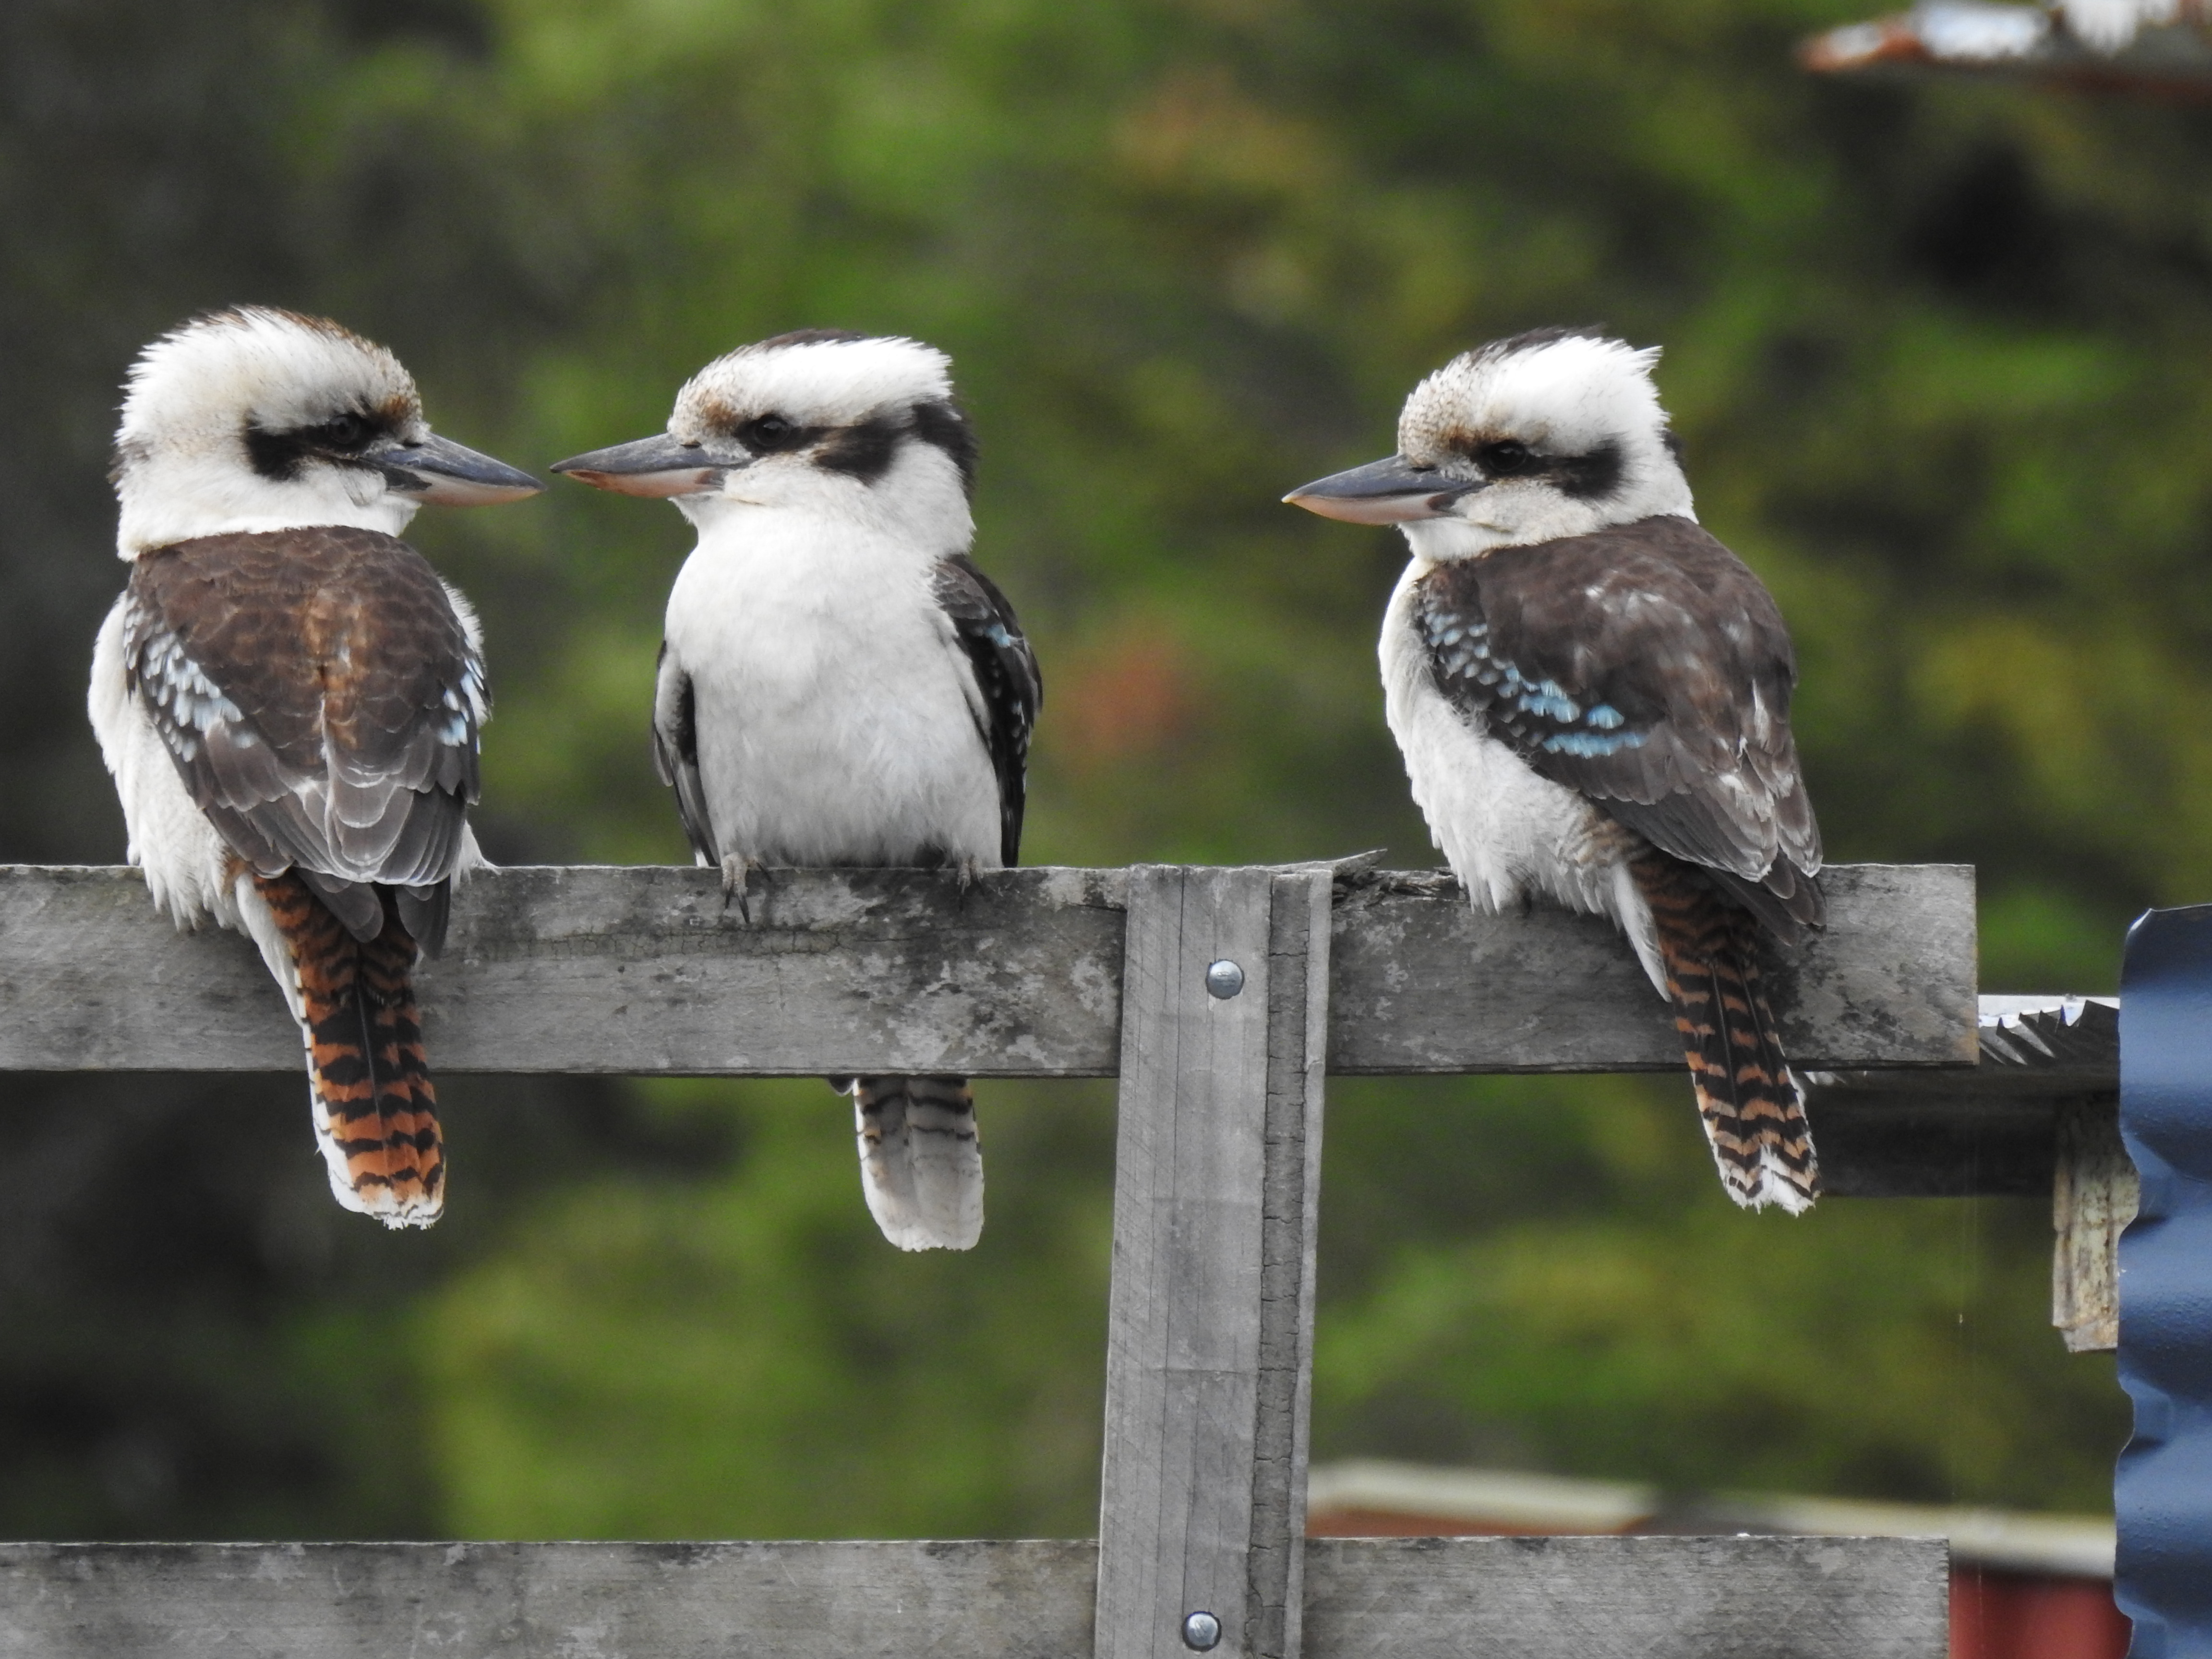 Family of Kookaburras in Inverleigh, photo taken by Andrea Bolton